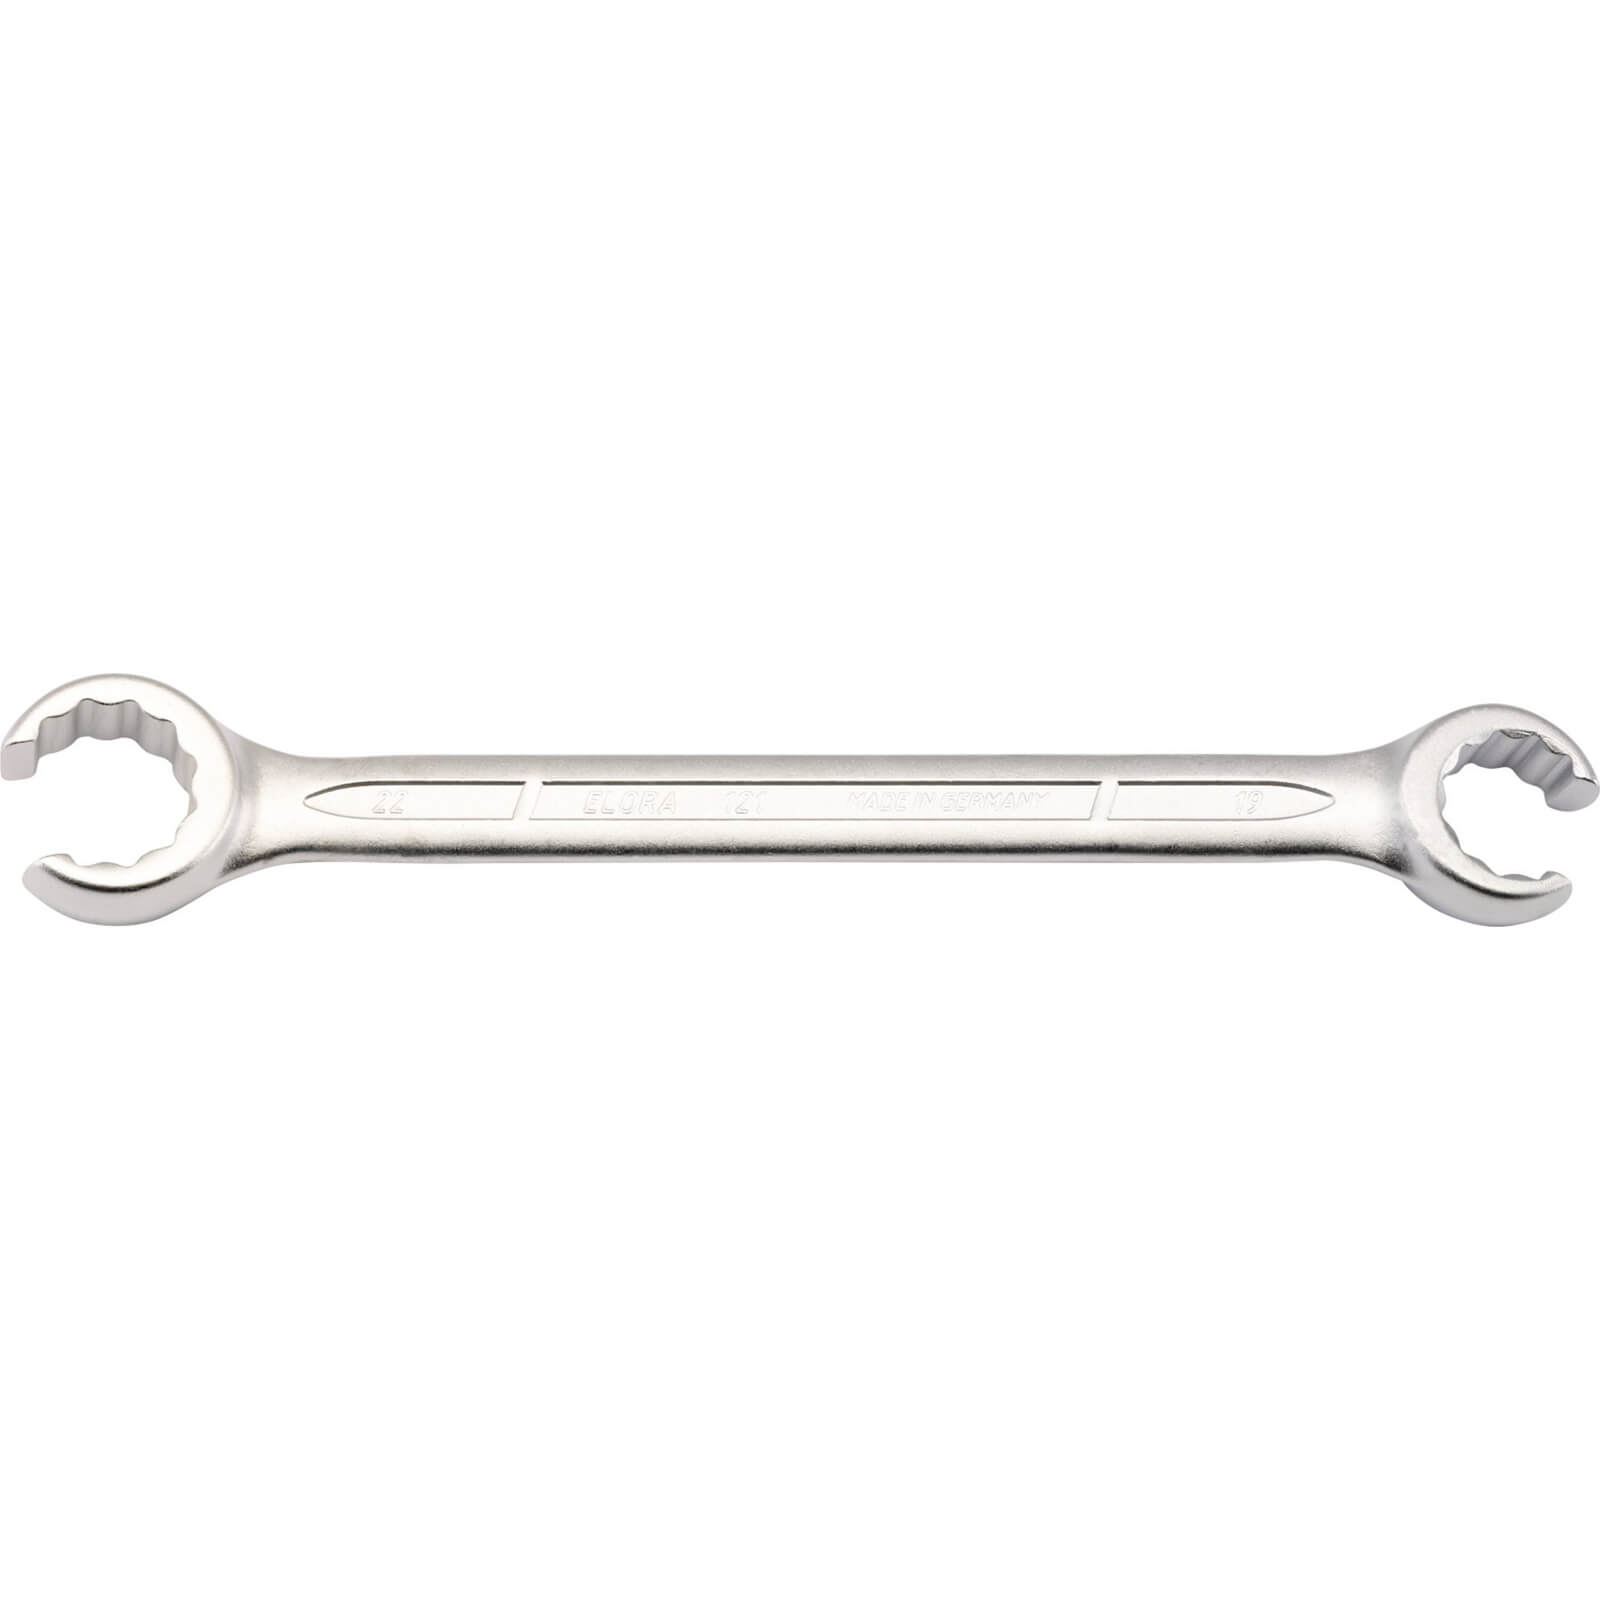 Image of Elora Flare Nut Spanner 19mm x 22mm